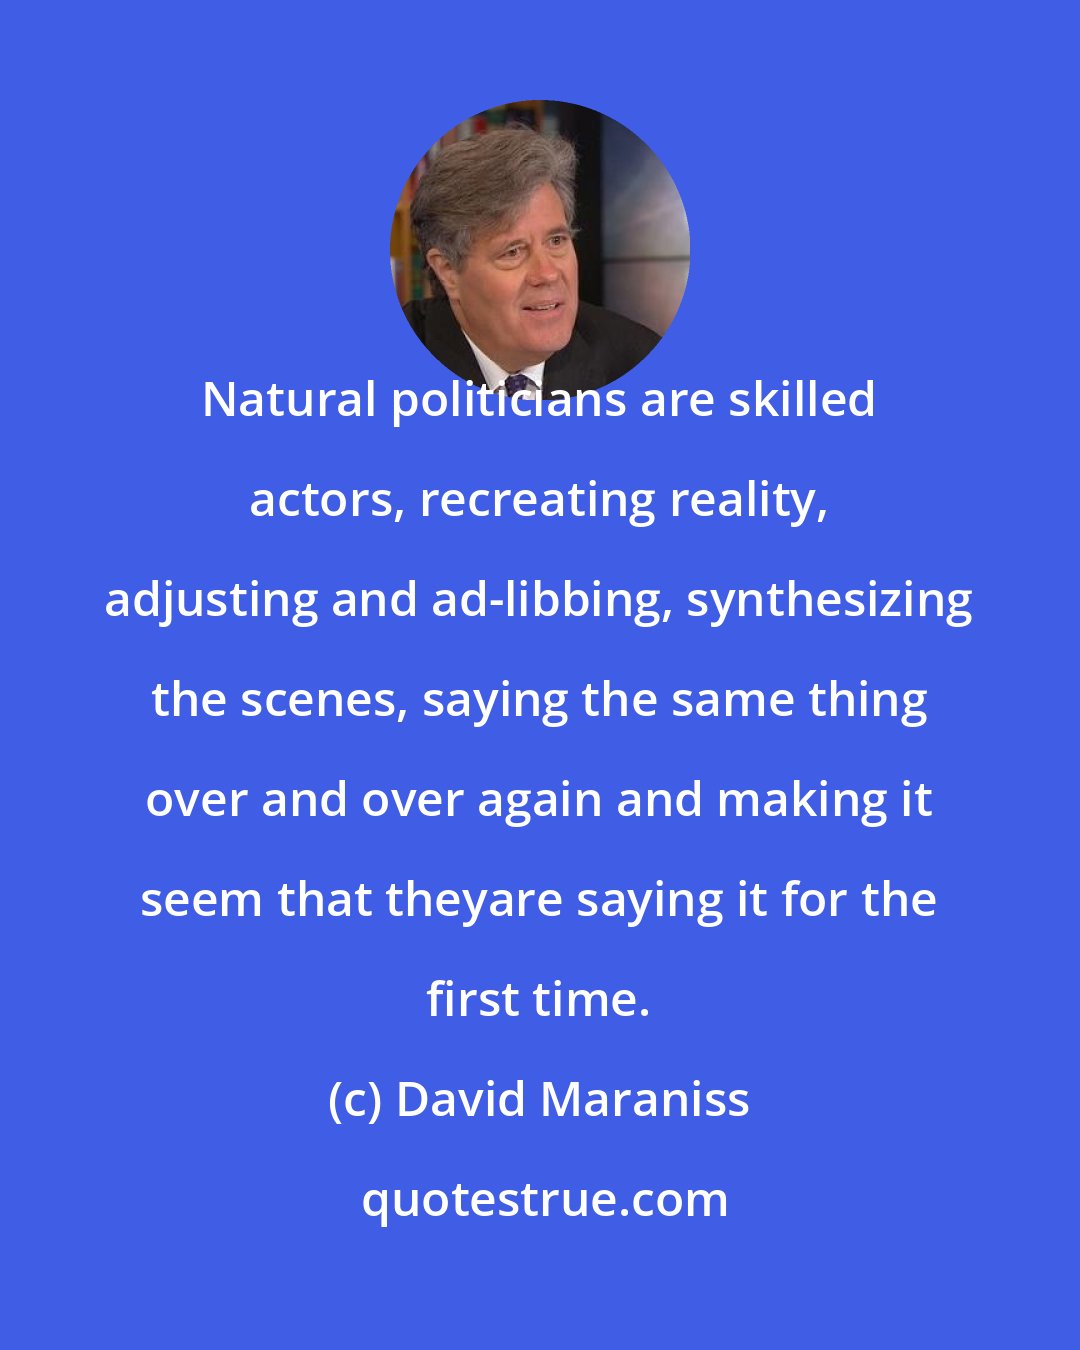 David Maraniss: Natural politicians are skilled actors, recreating reality, adjusting and ad-libbing, synthesizing the scenes, saying the same thing over and over again and making it seem that theyare saying it for the first time.